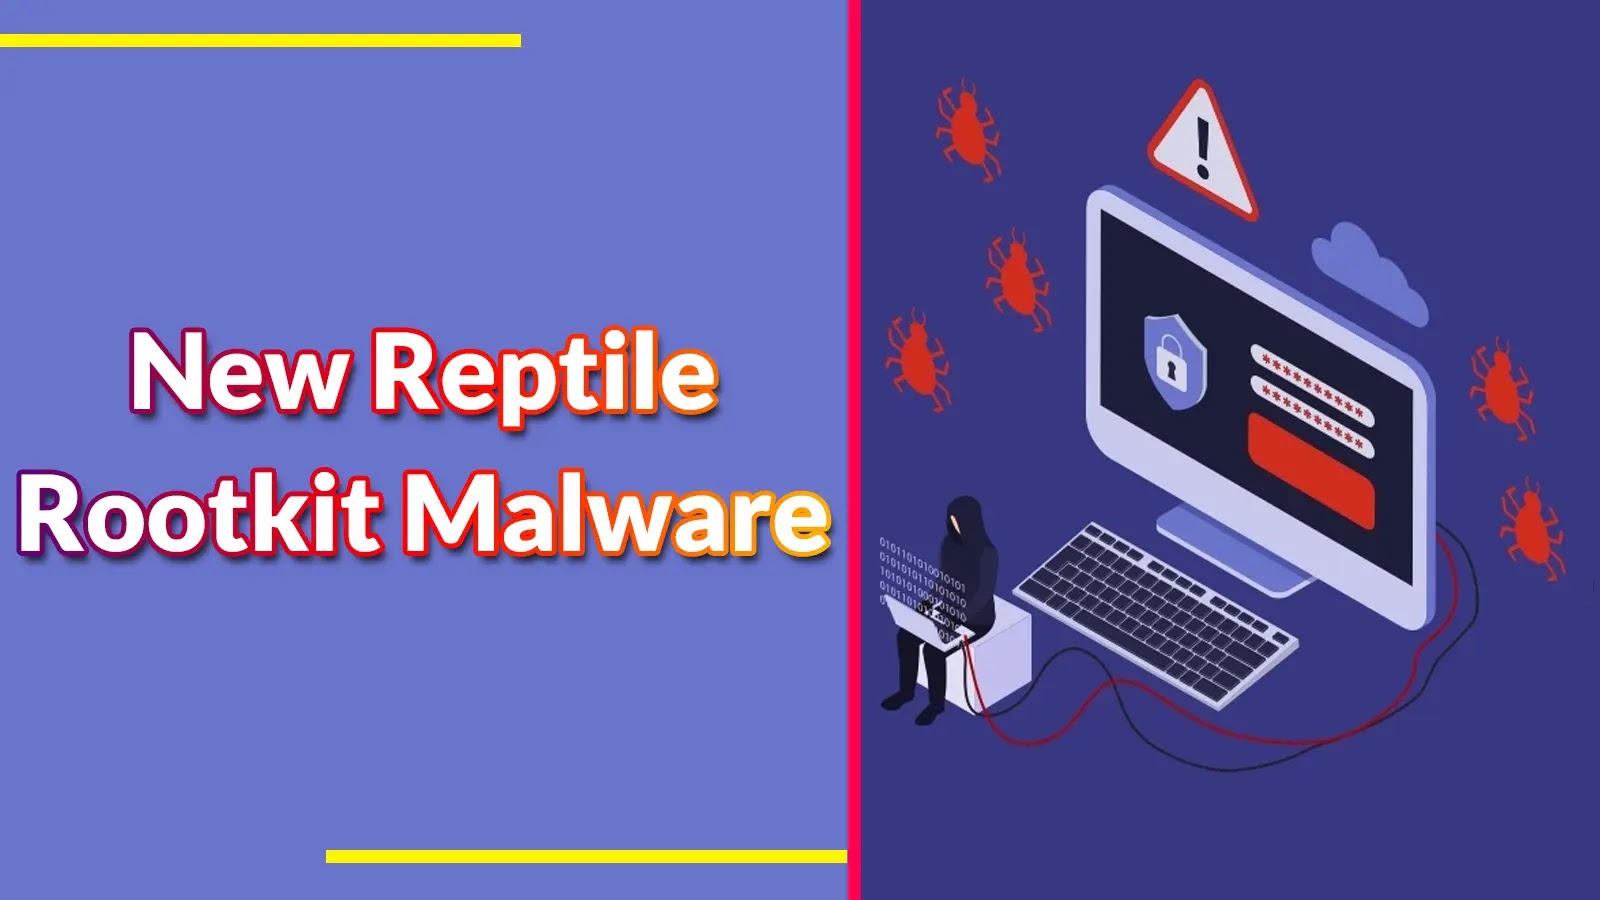 New Reptile Rootkit Malware Attacking Linux Systems Using Port Knocking